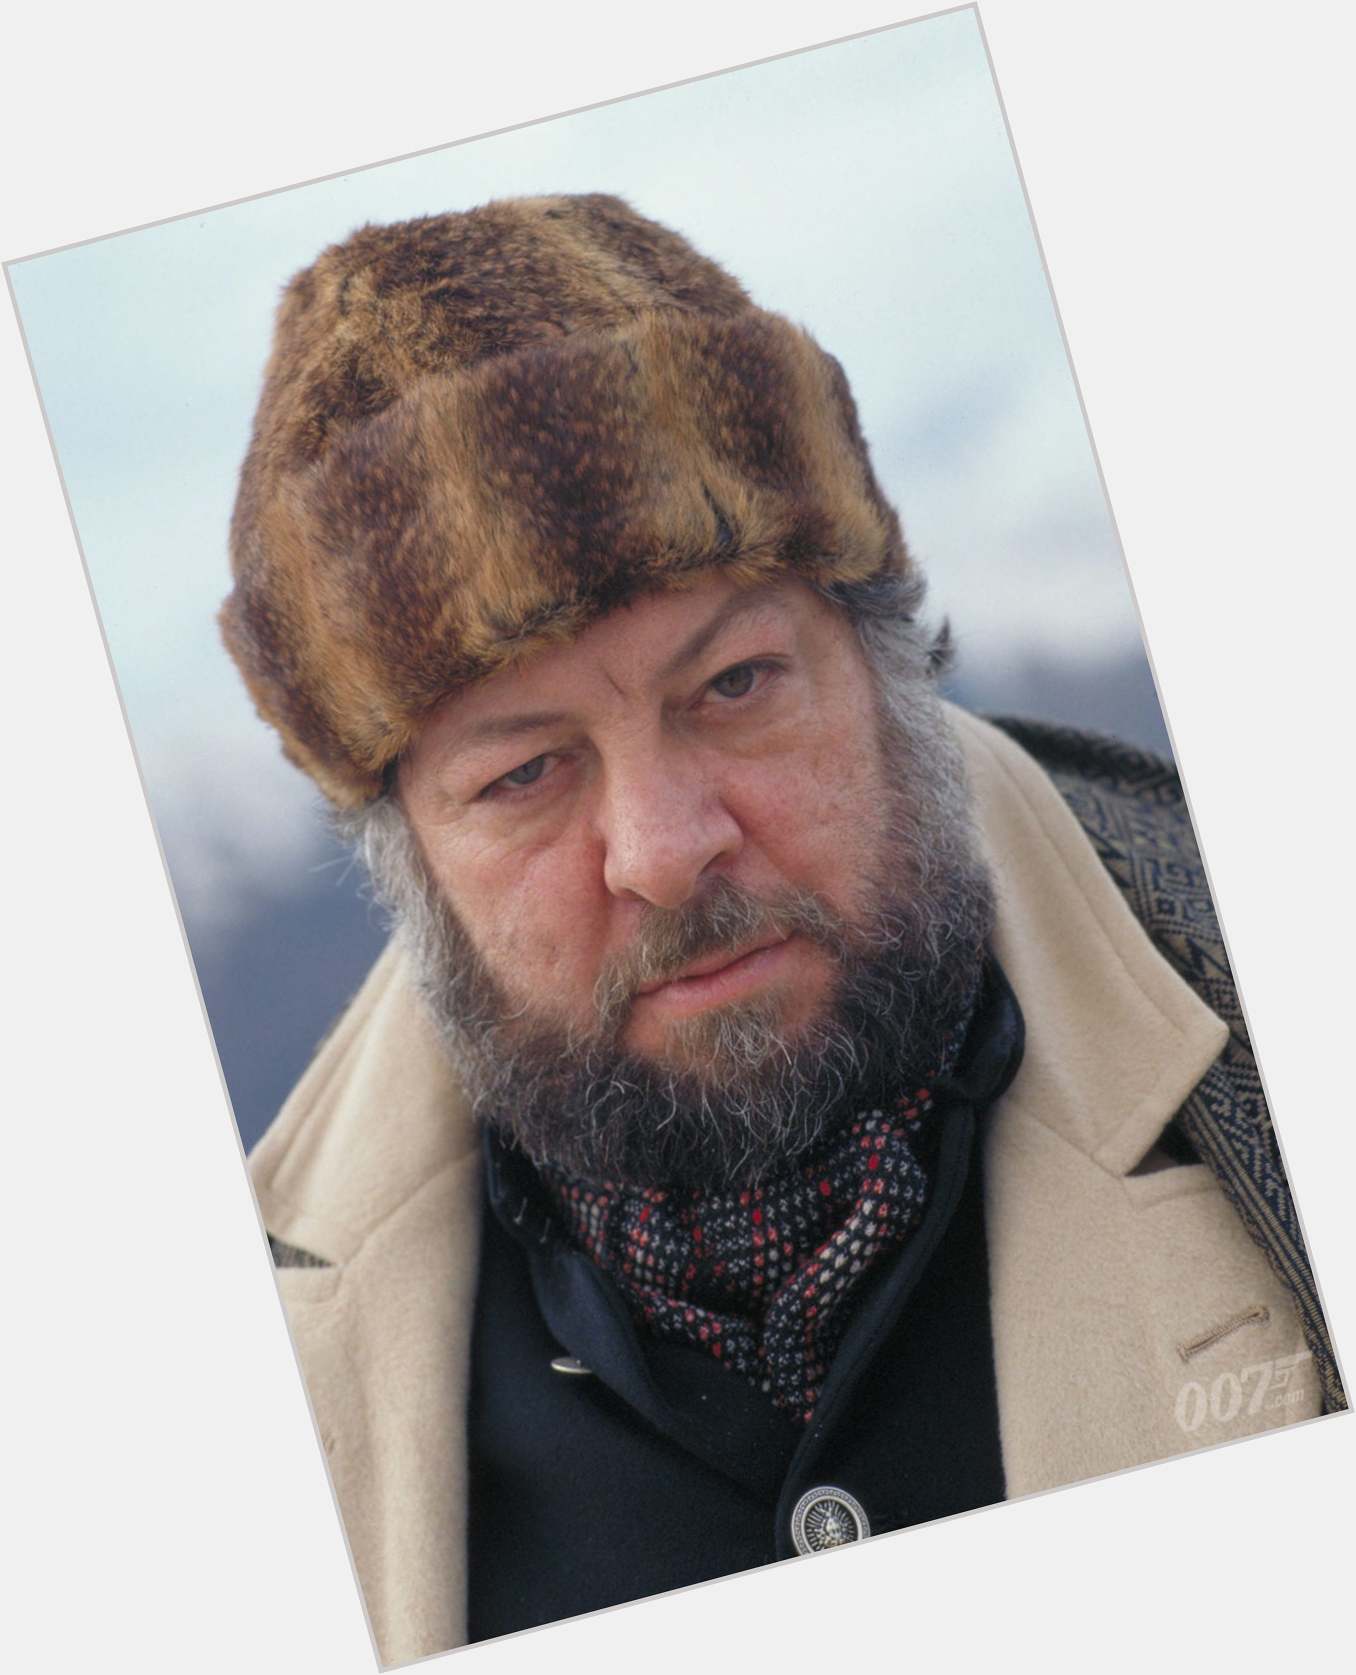 <a href="/hot-men/ricky-jay/is-he-married-still-alive">Ricky Jay</a> Average body,  salt and pepper hair & hairstyles